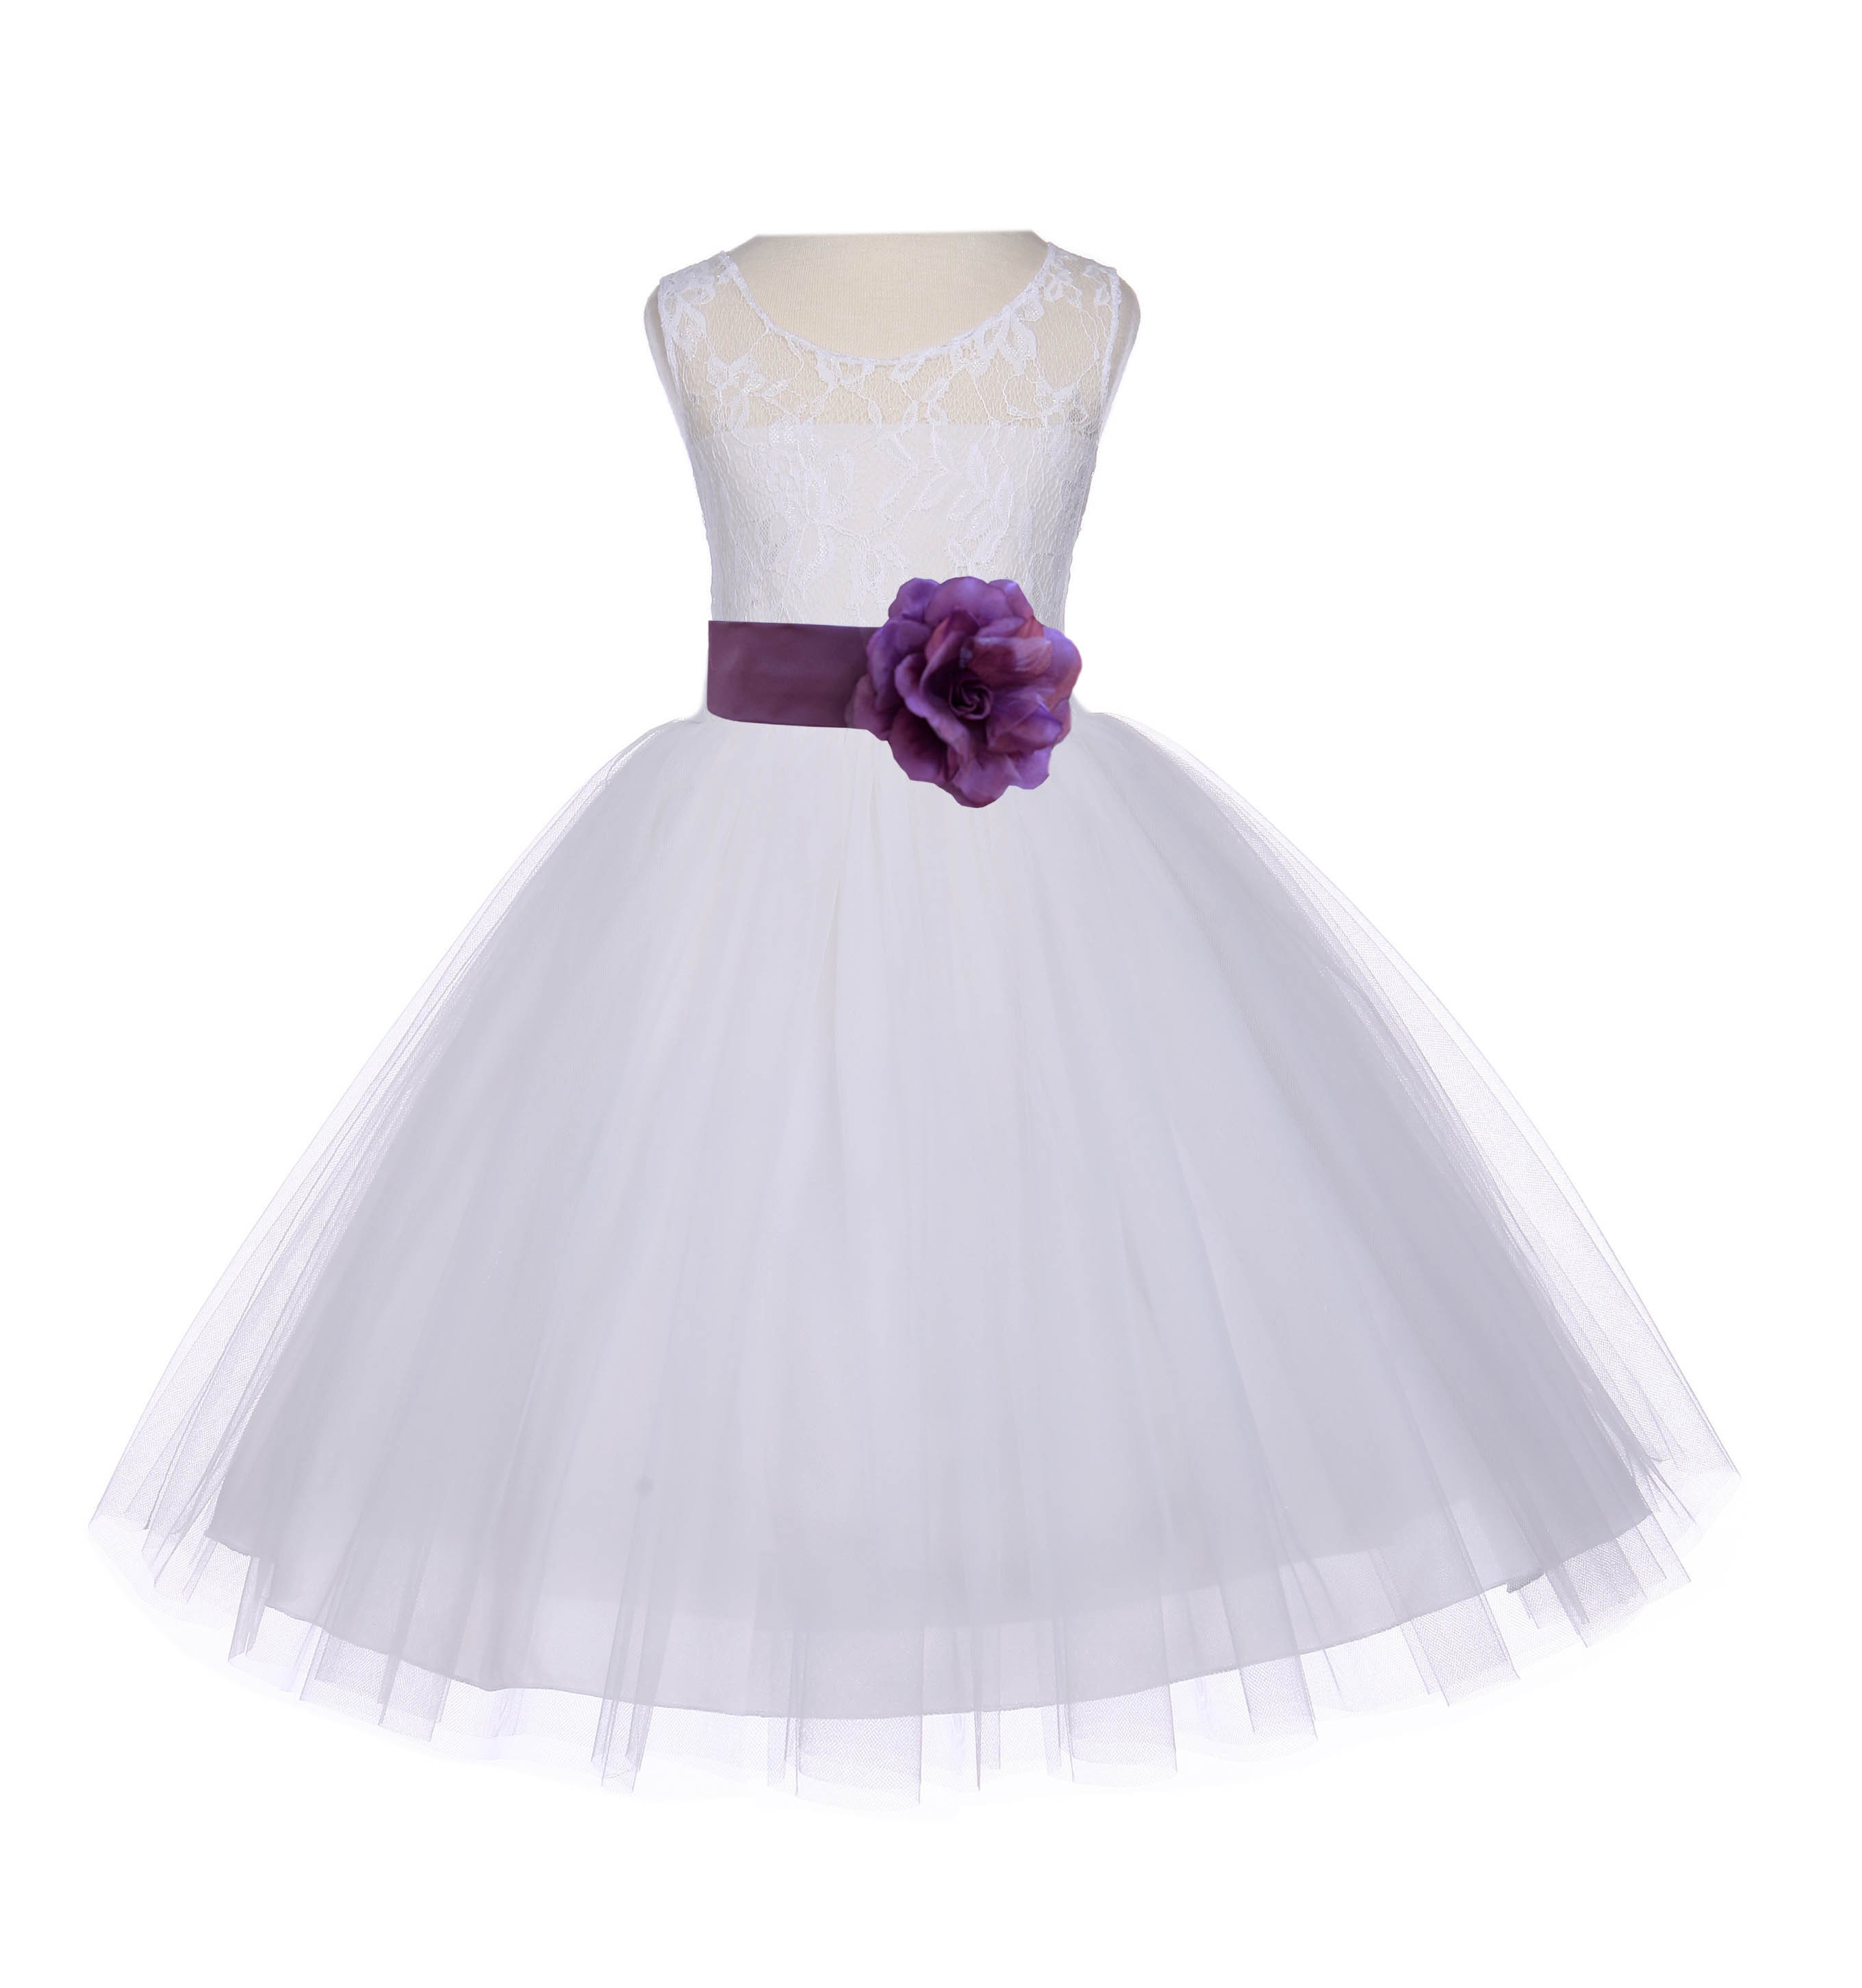 Ivory/Wisteria Floral Lace Bodice Tulle Flower Girl Dress Bridesmaid 153S